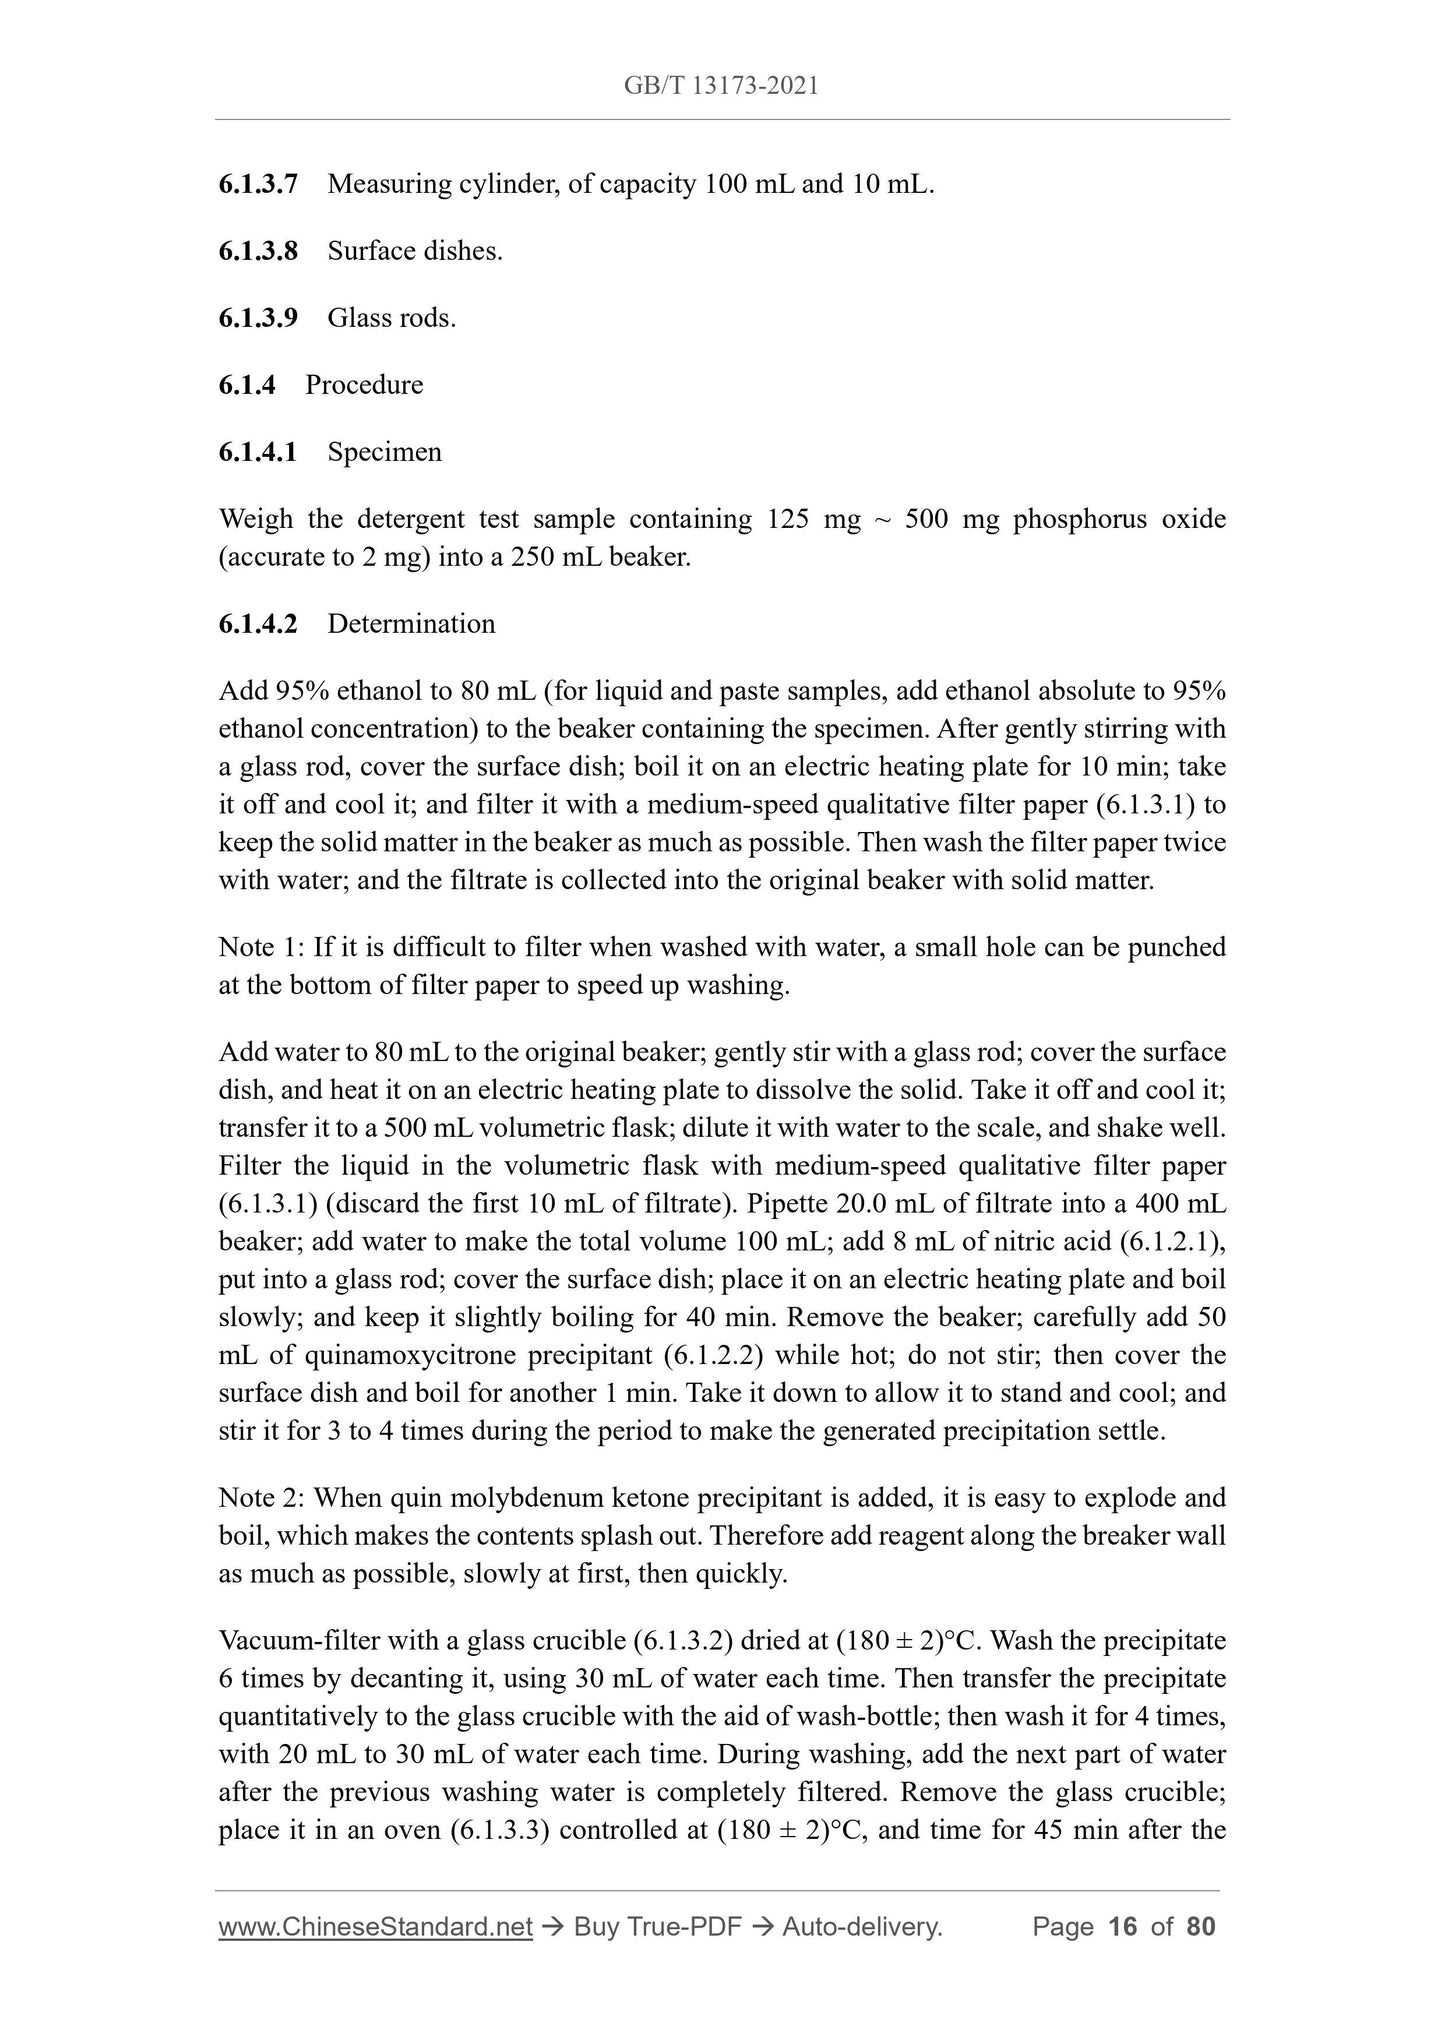 GB/T 13173-2021 Page 7